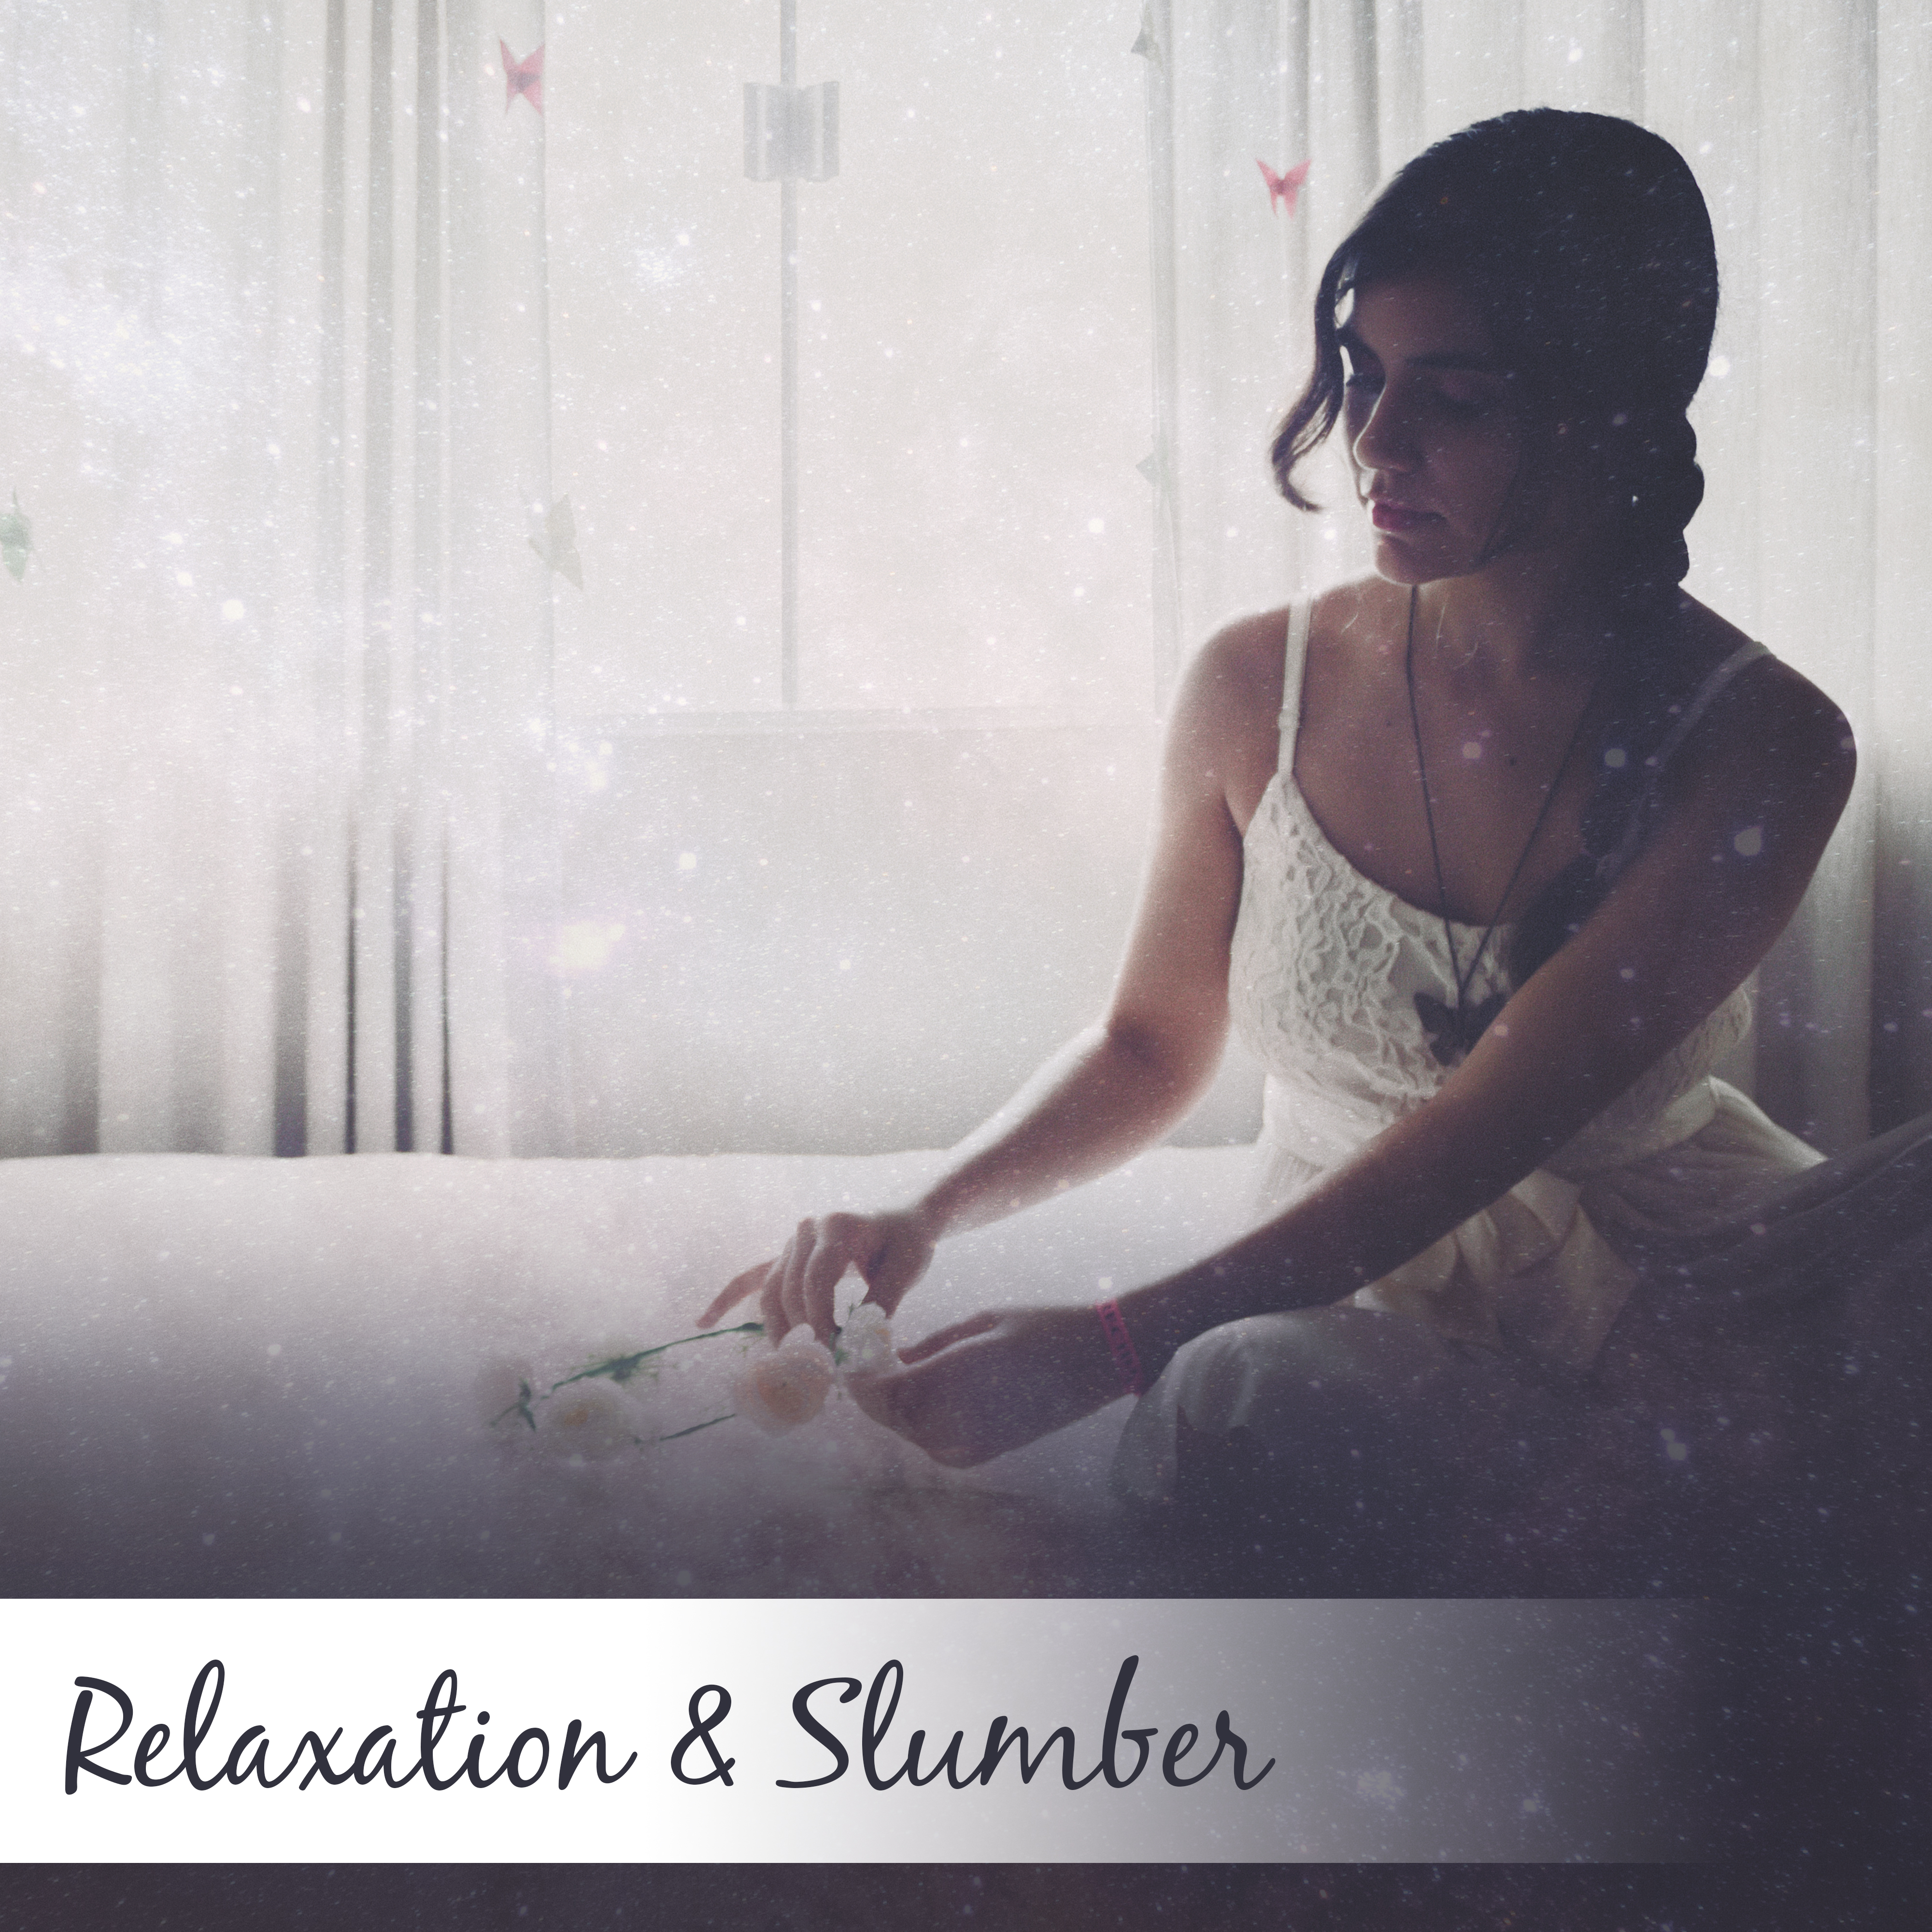 Relaxation & Slumber – Deep Dreams, Tranquil Sleep, Relaxing Therapy at Night, Relief, Sleeping Time, Relaxation Bedtime, Healing Music to Bed